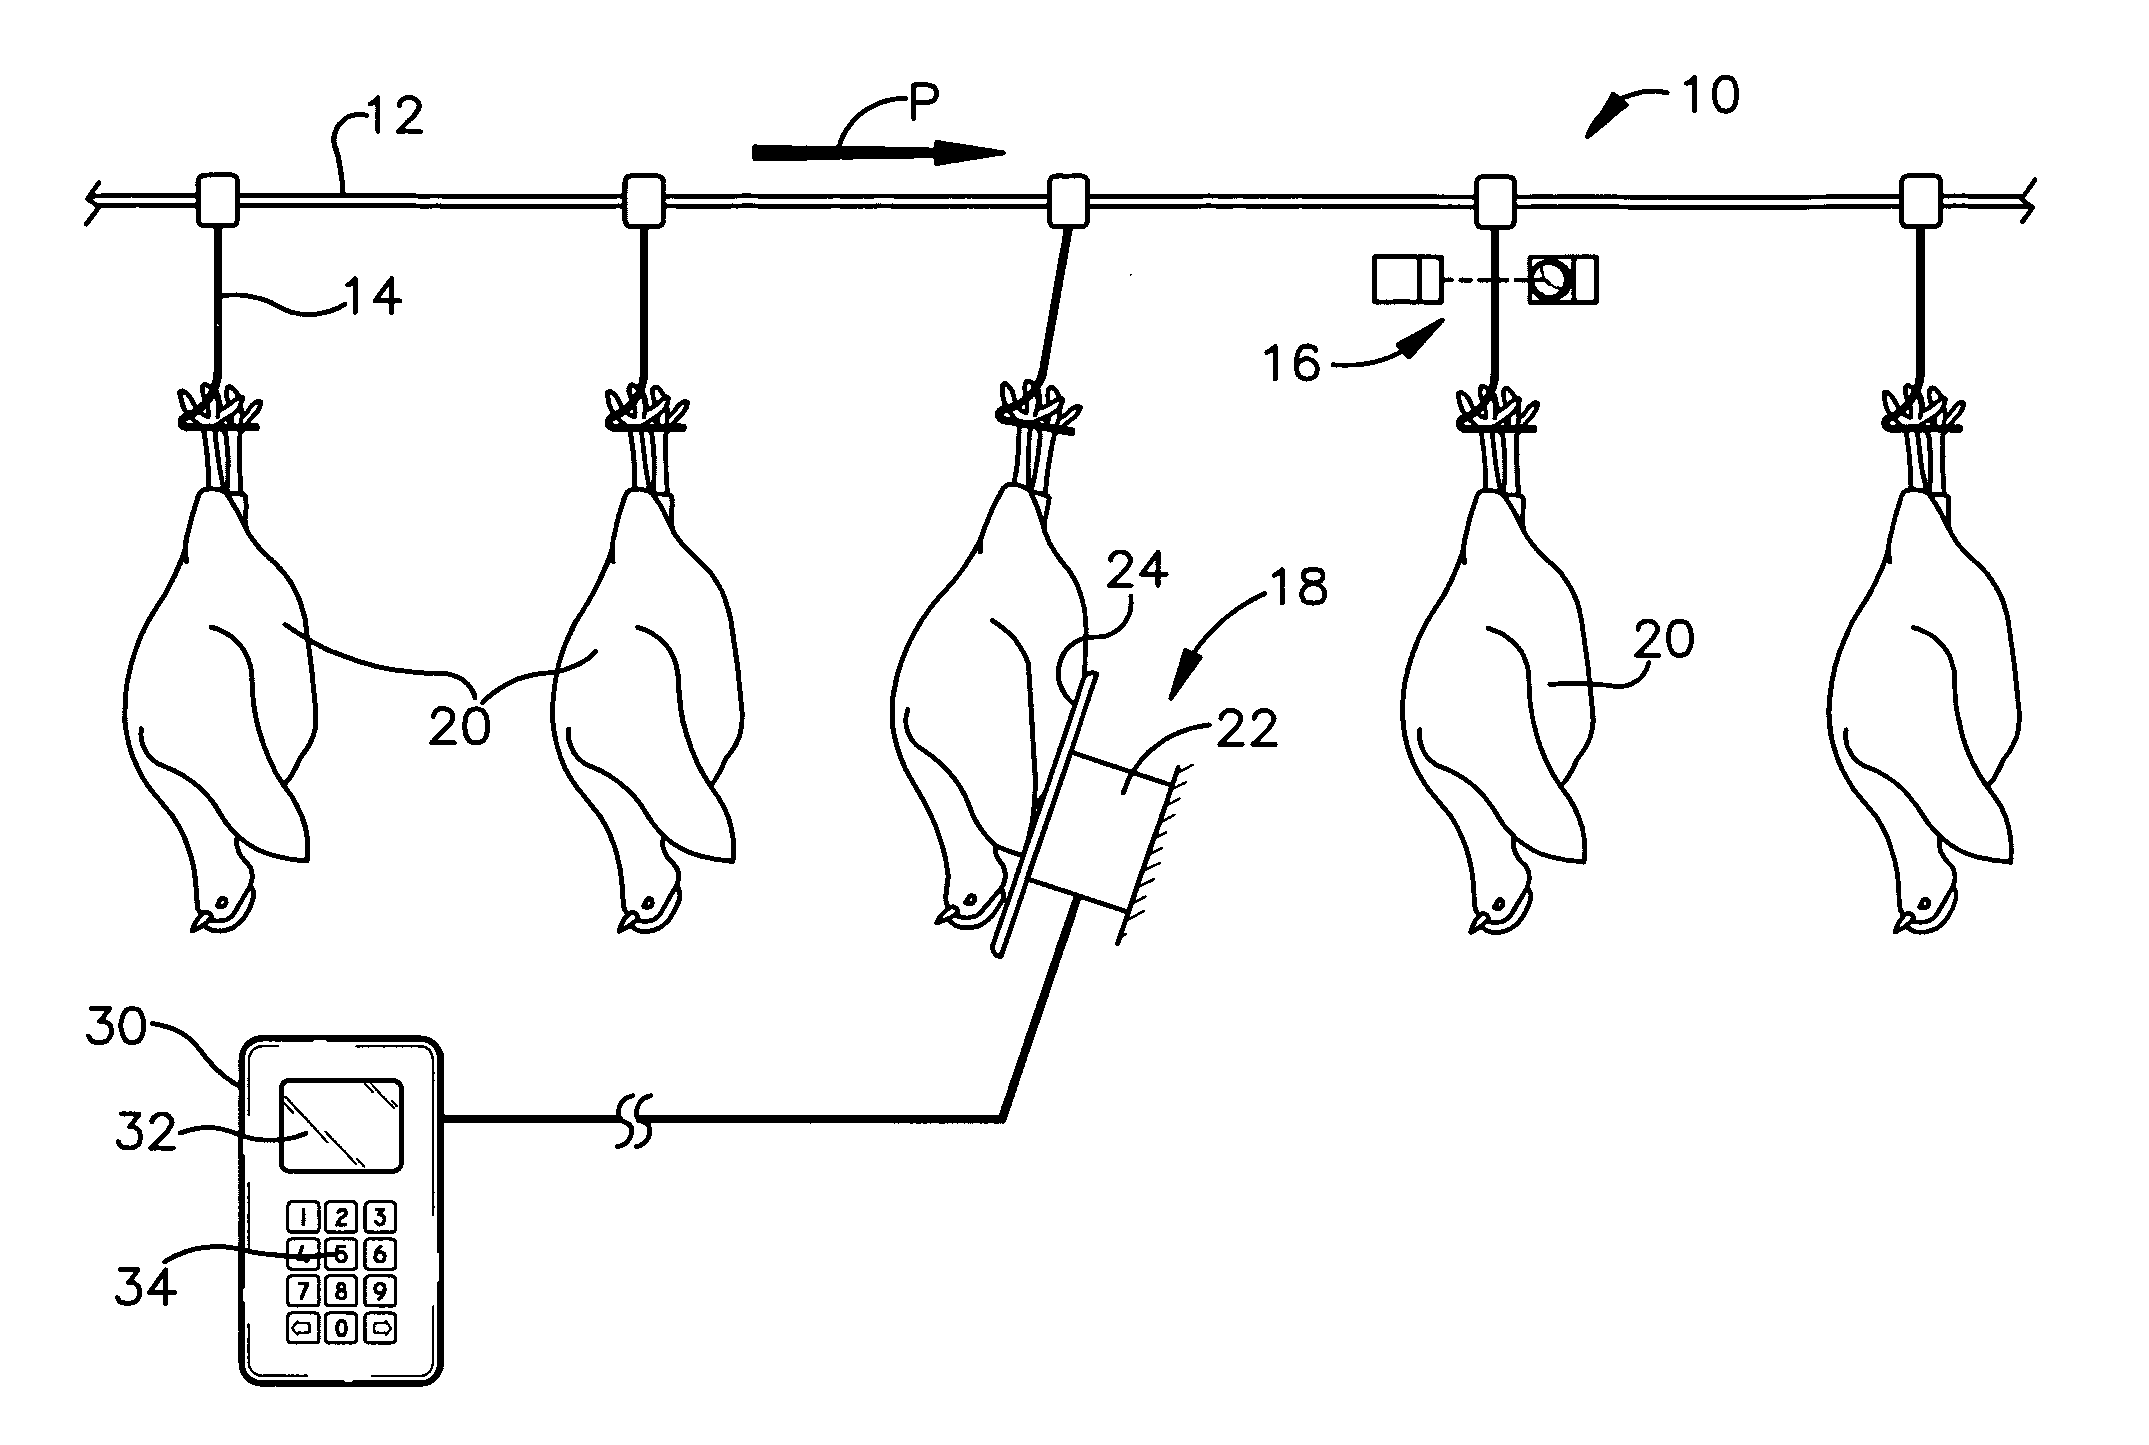 Overhead poultry conveying and counting system